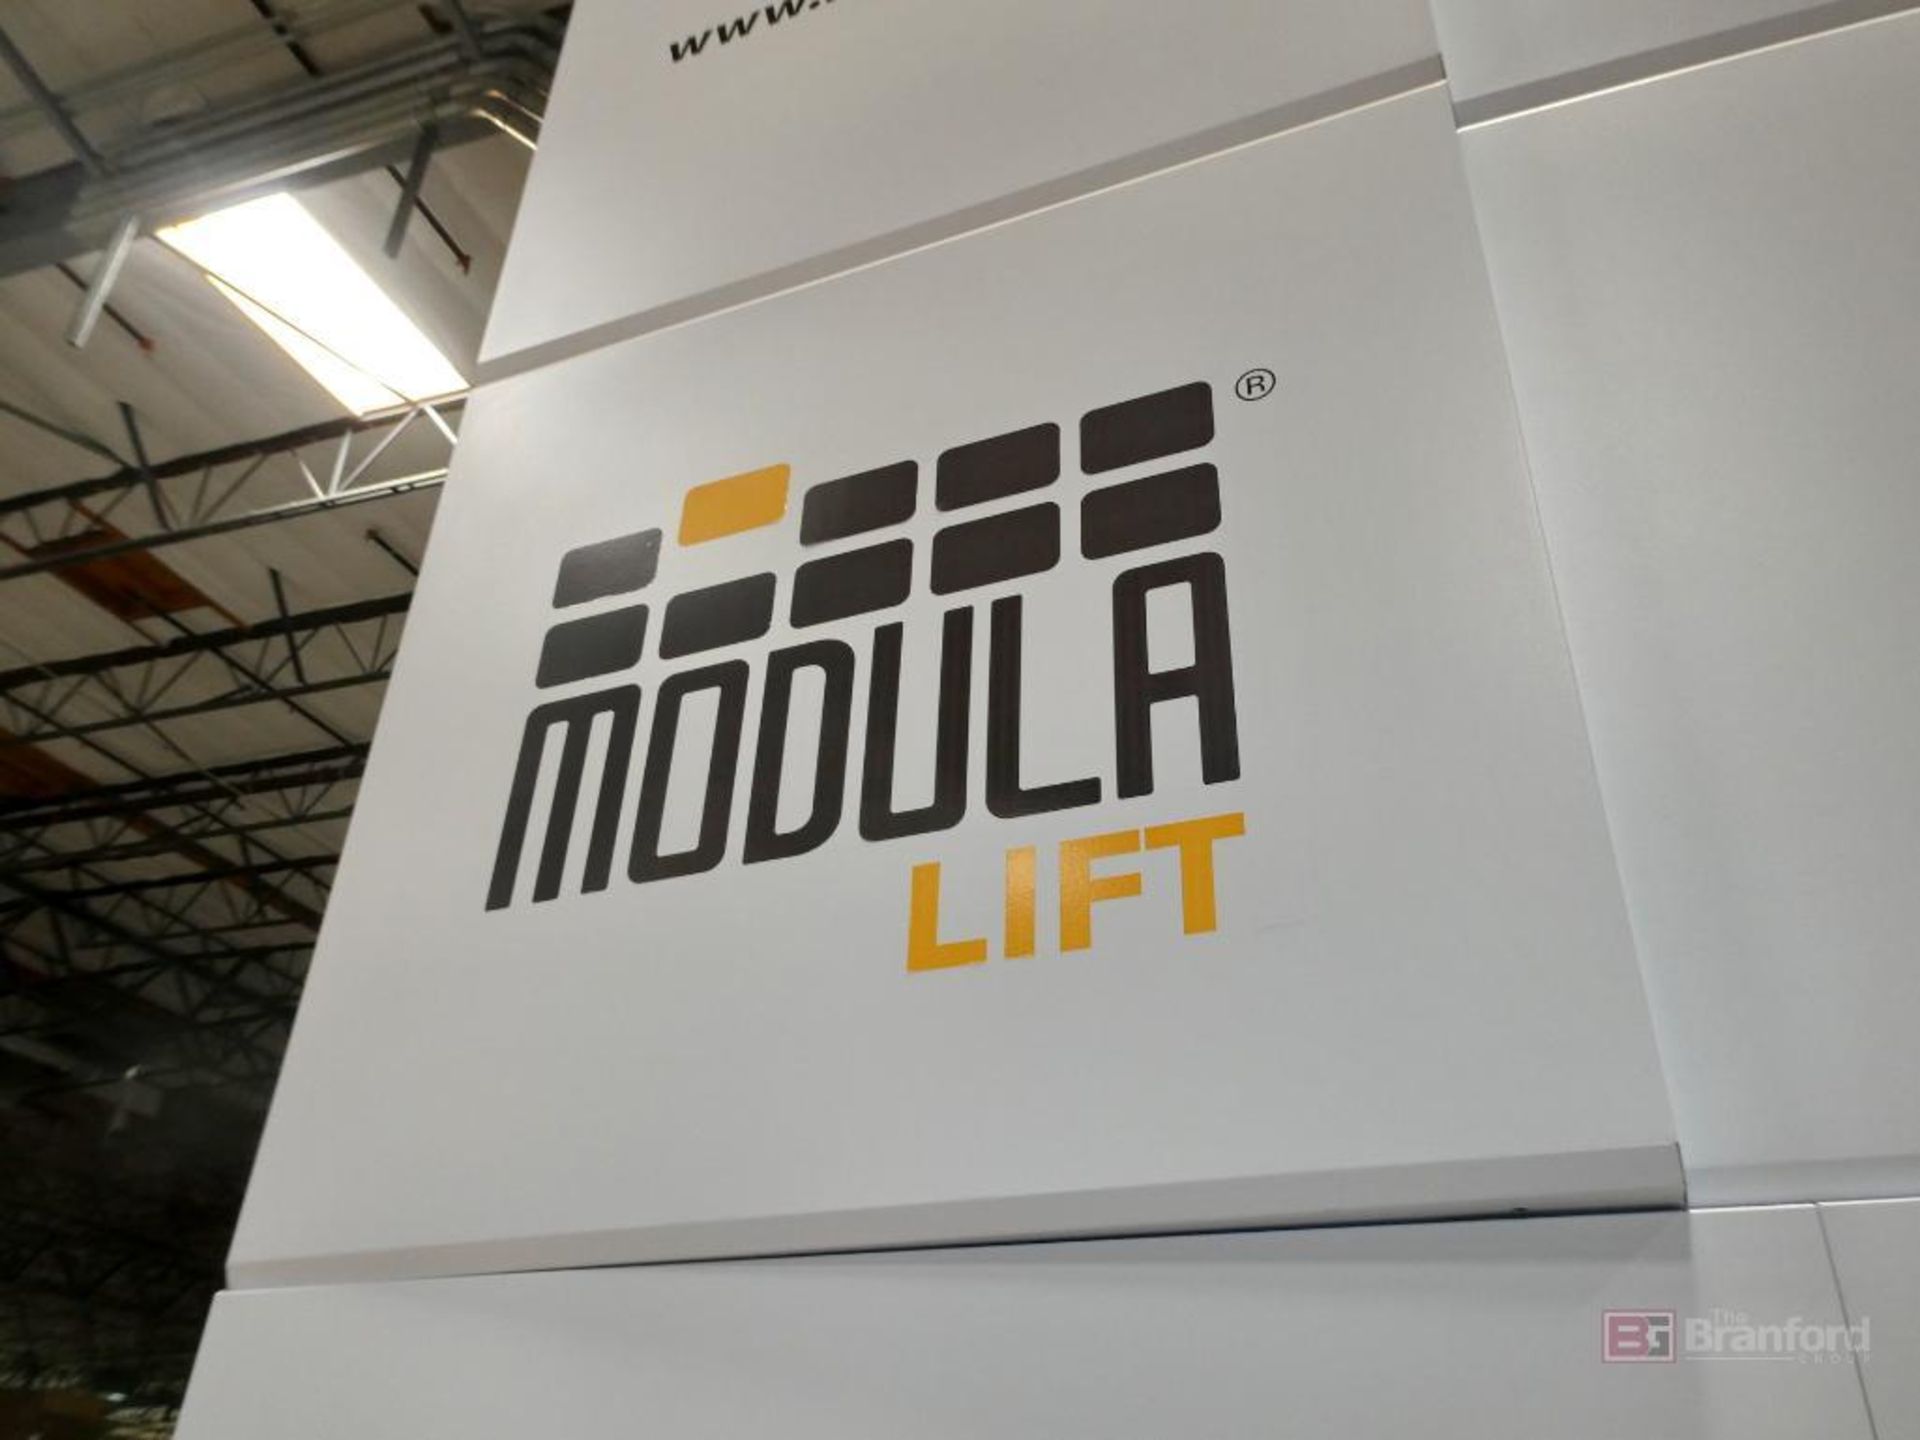 2021 Modula Lift Model ML50D, Automated Vertical Carousel Storage System - Image 8 of 9